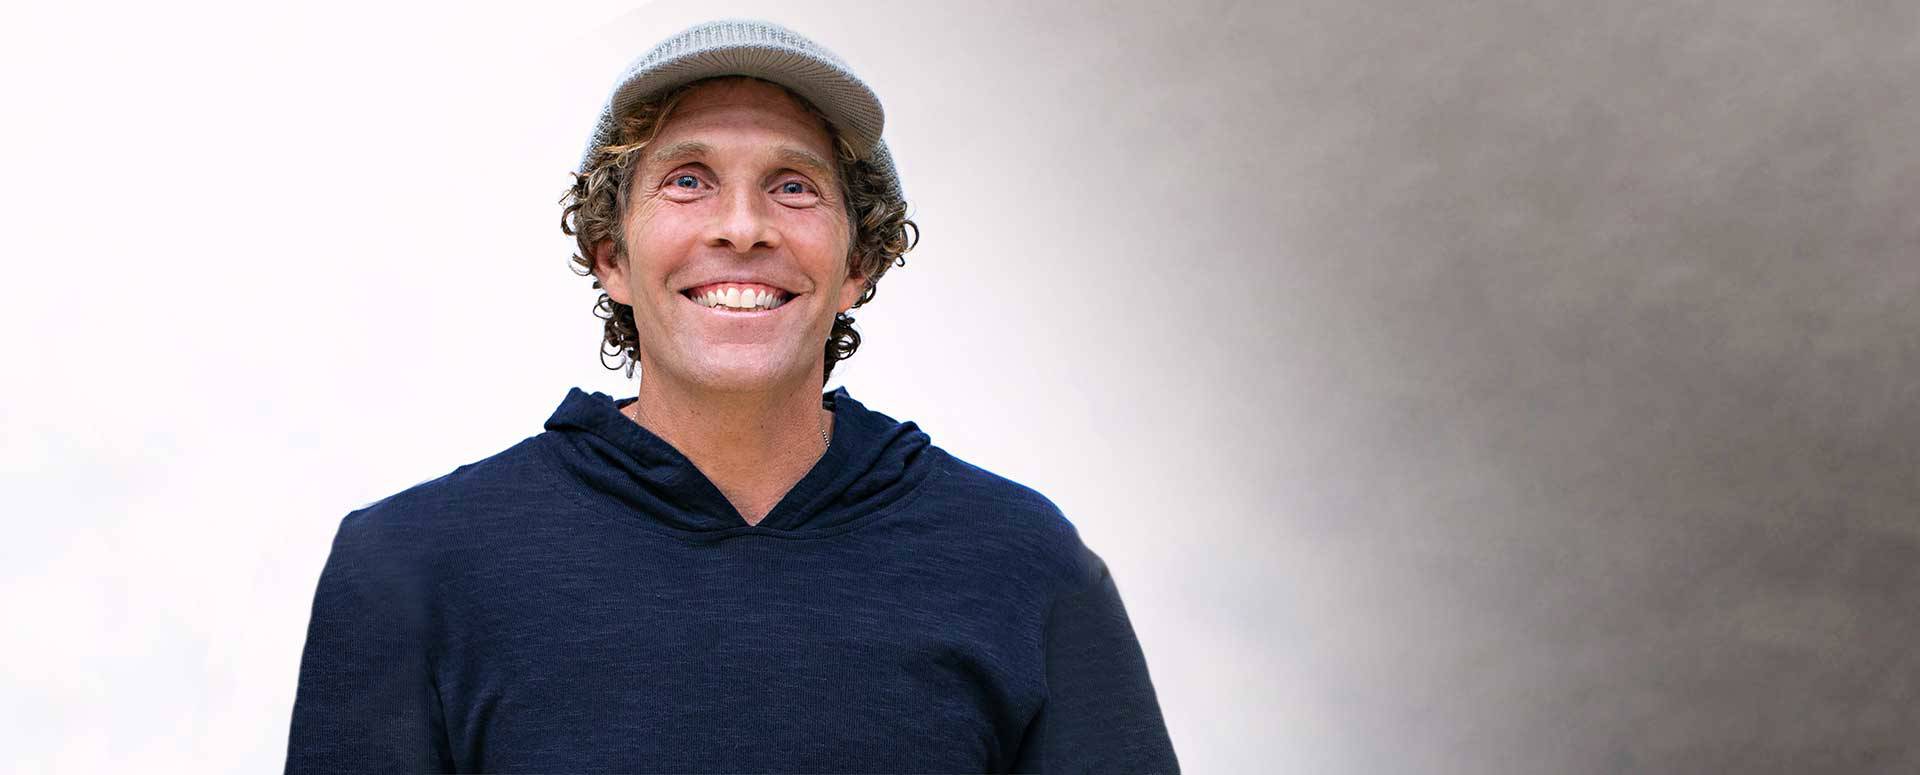 Jesse Itzler, Co-founder of Marquis Jet, and Jay-Z (R) smile and